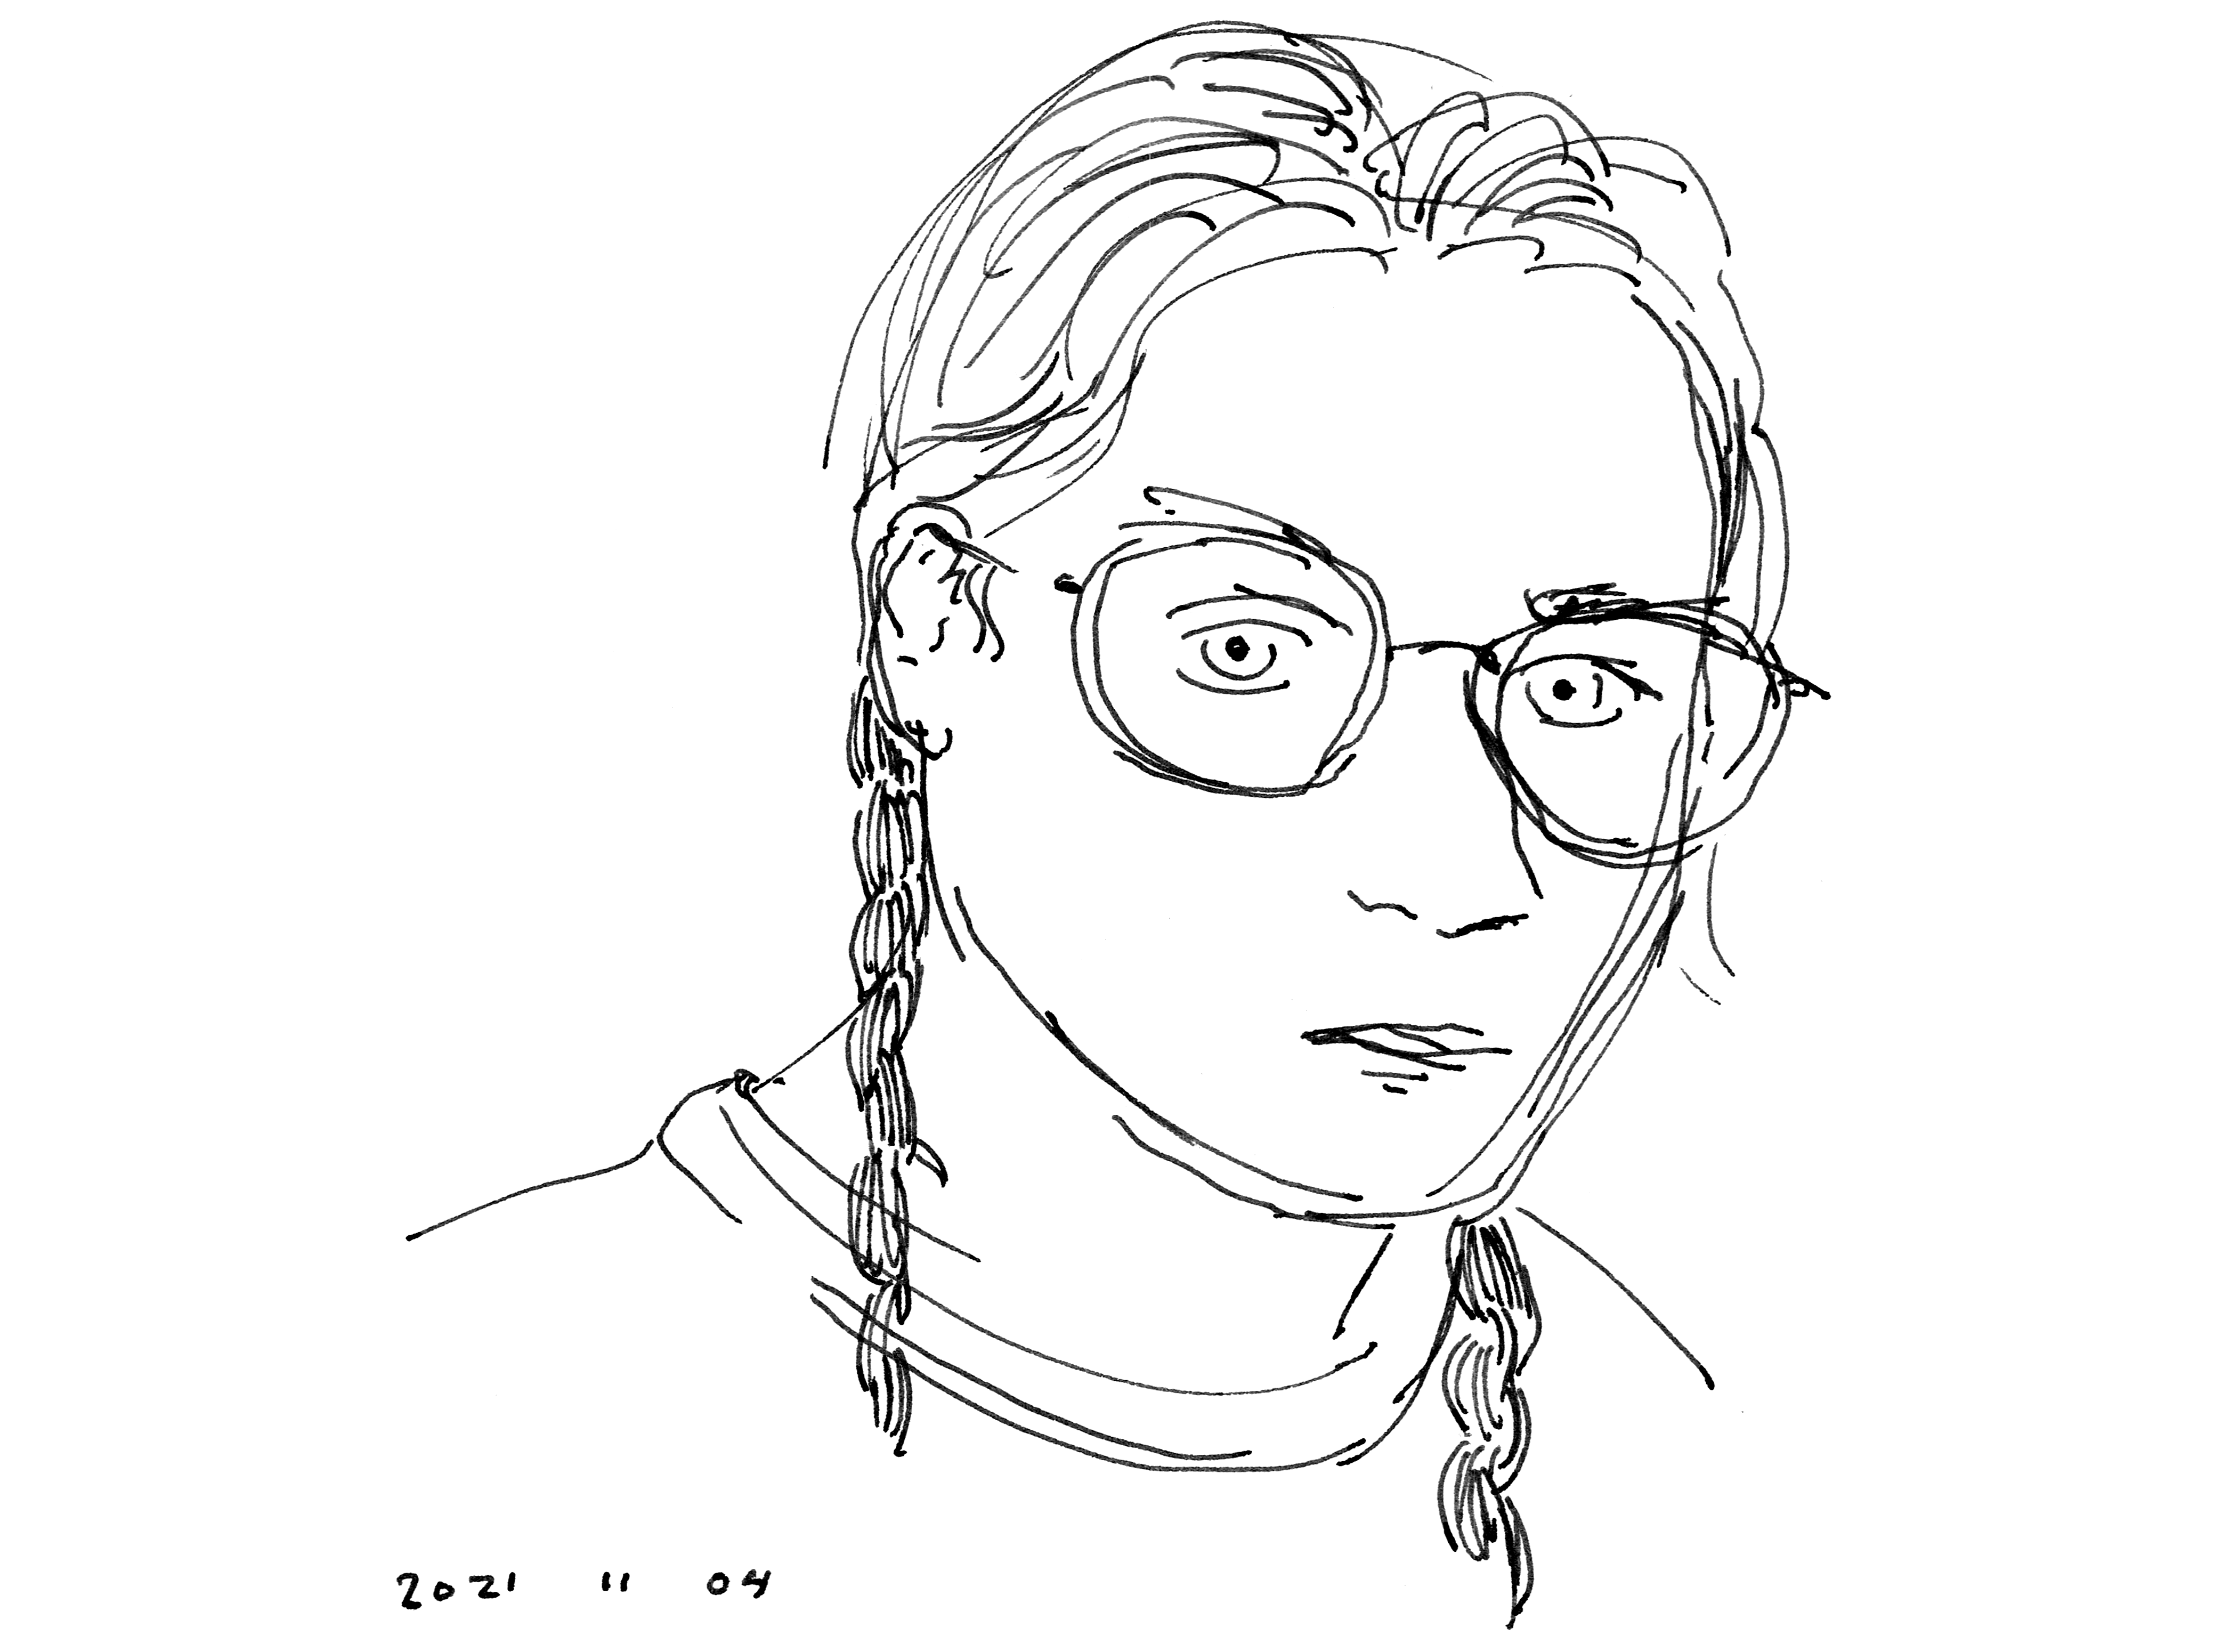 A black and white, three-quarter profile, drawn portrait of Nick Loewen, wearing braids and glasses.